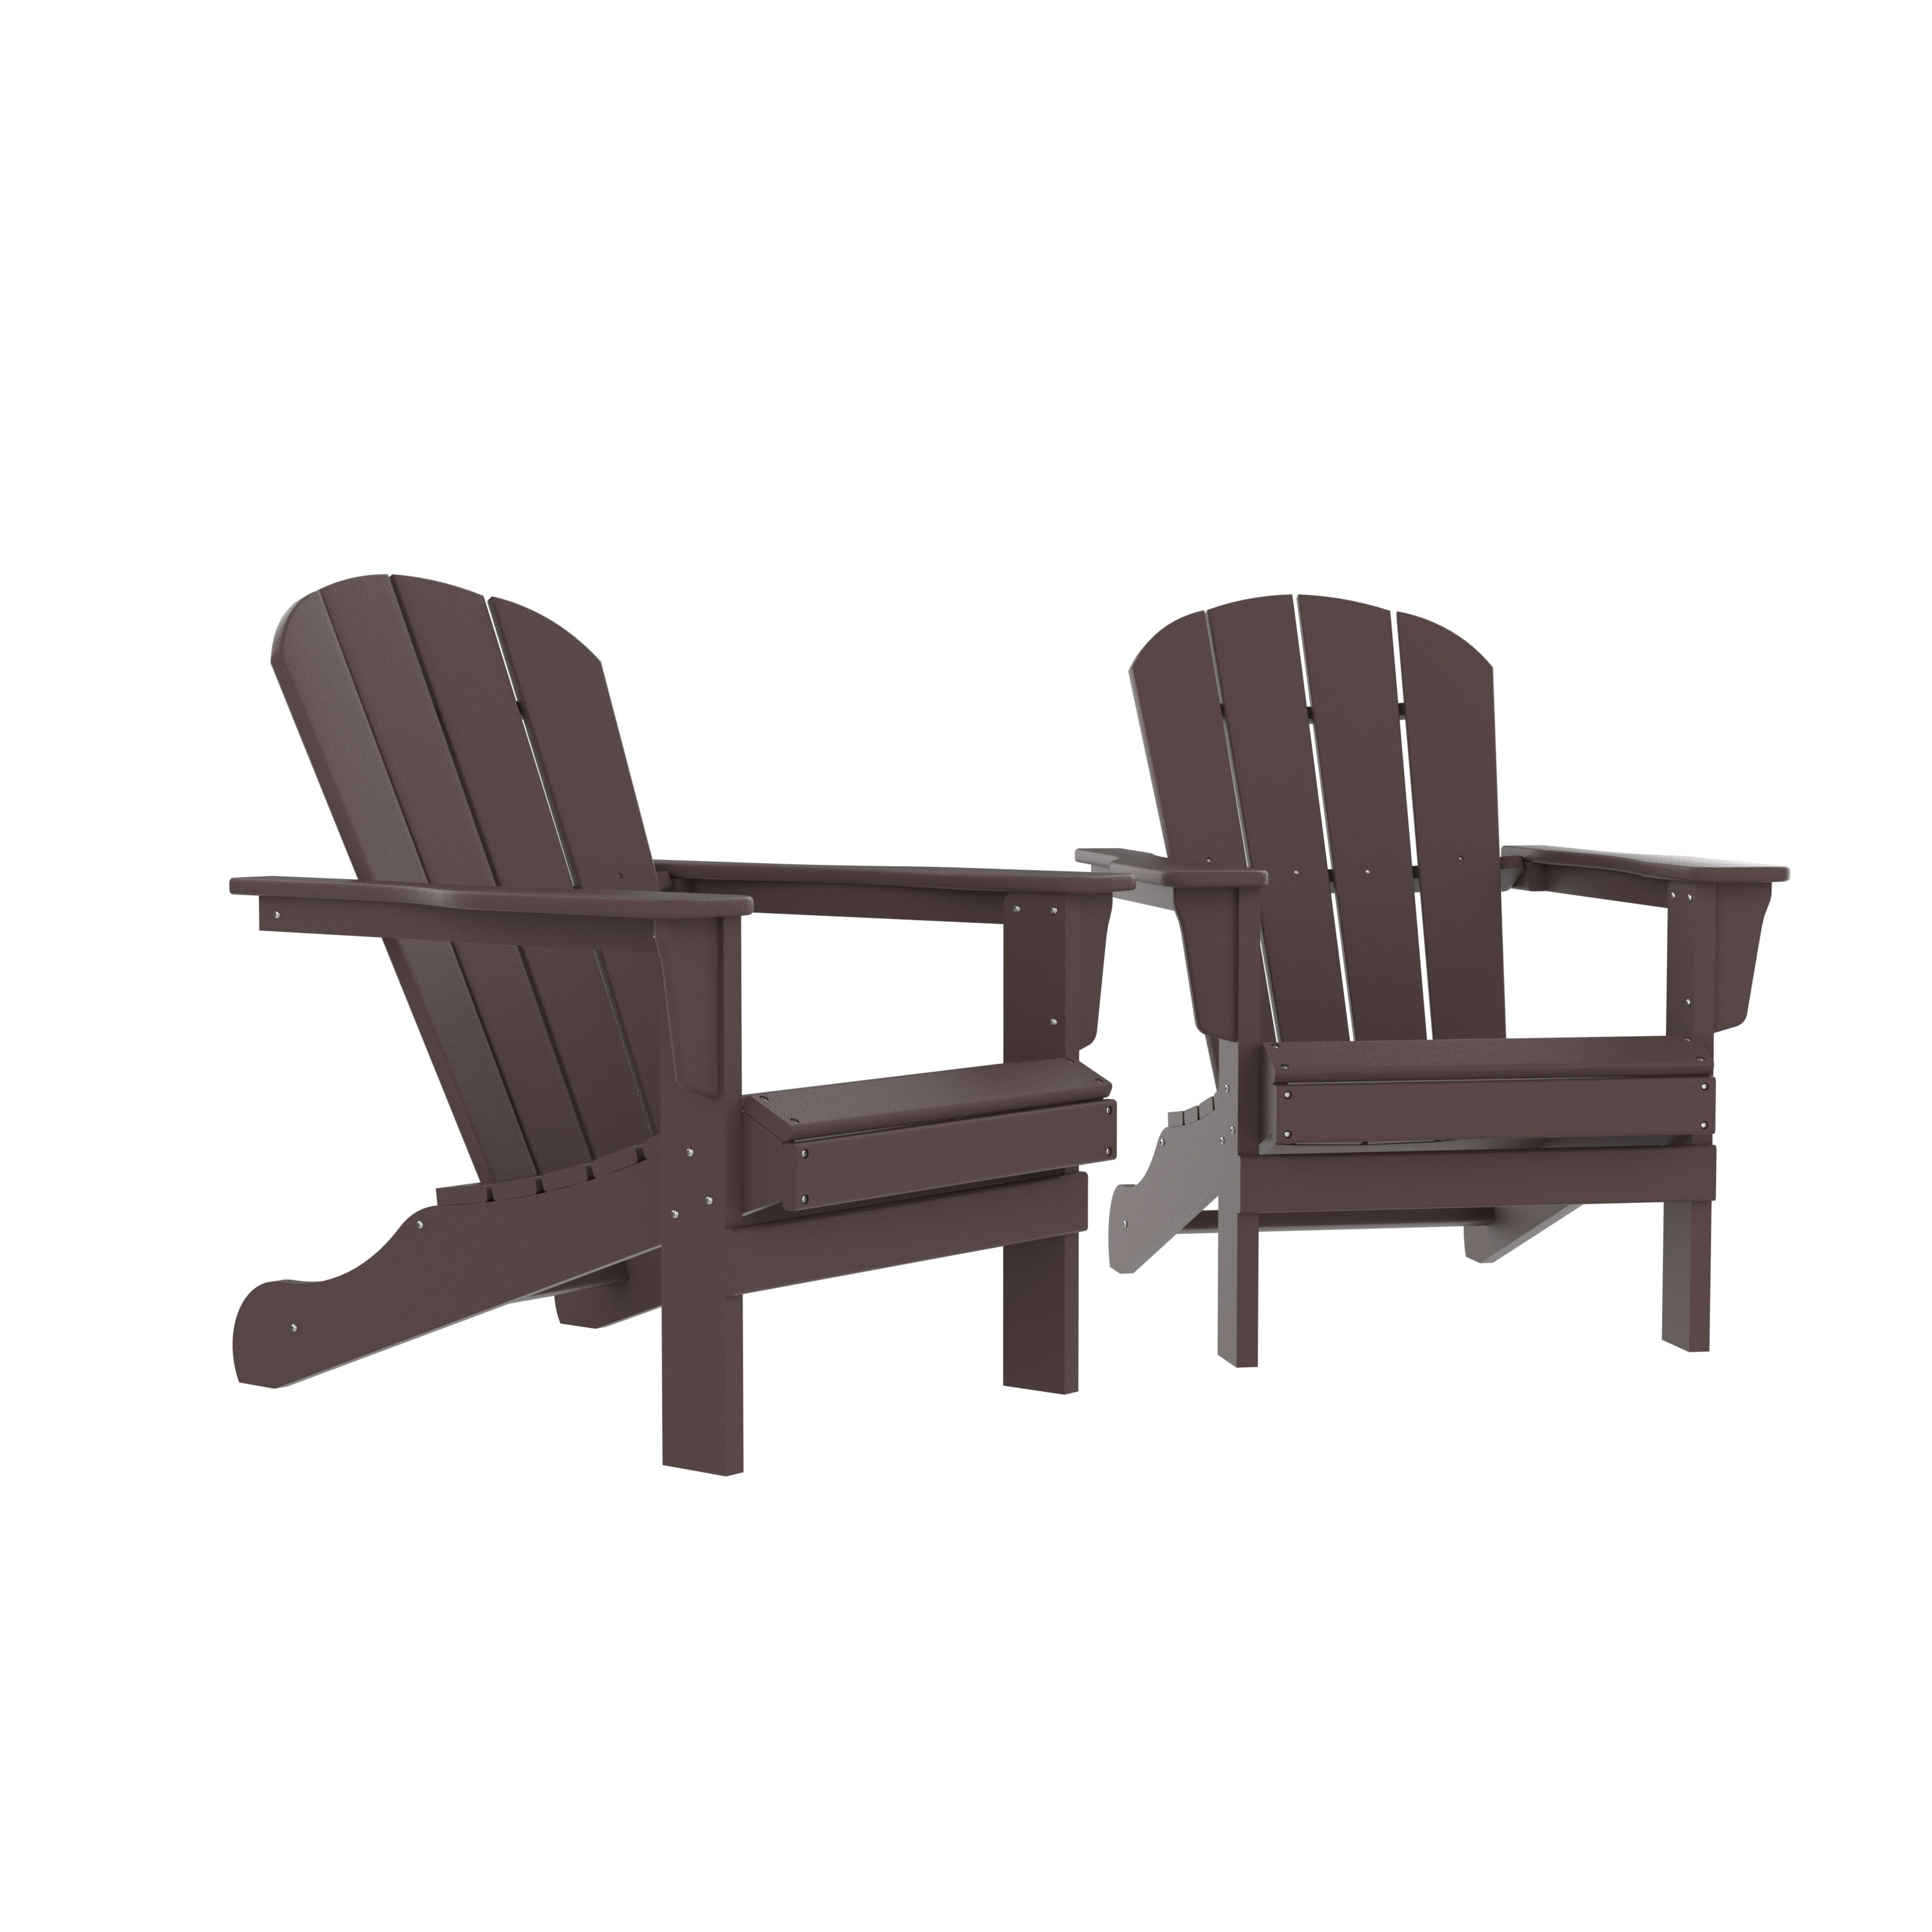 2-piece Outdoor Adirondack Chair Set For 2  With Ergonomic Seat and Tall Slanted Back Design  Suitable Any Indoor and Outdoor Places